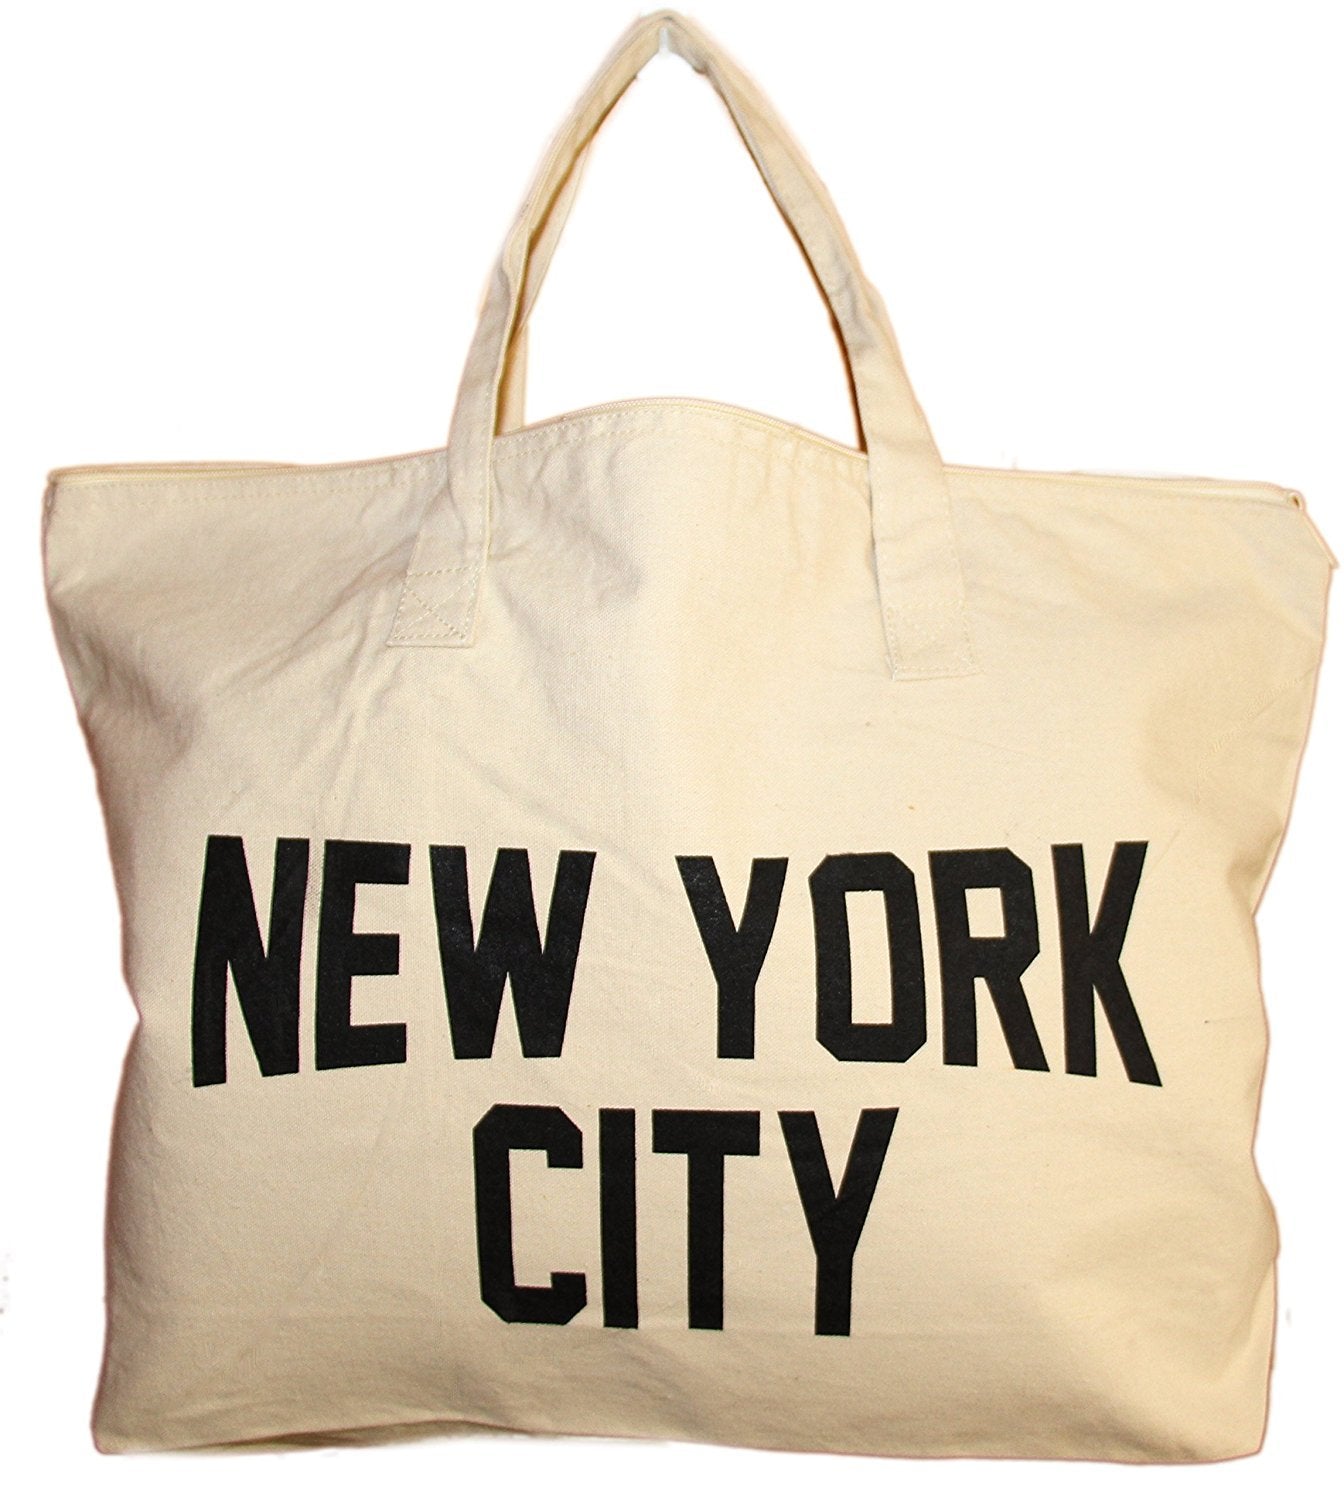 NYC Zippered Tote Bag 100% Cotton Canvas New York City Beach Shopping Gym by